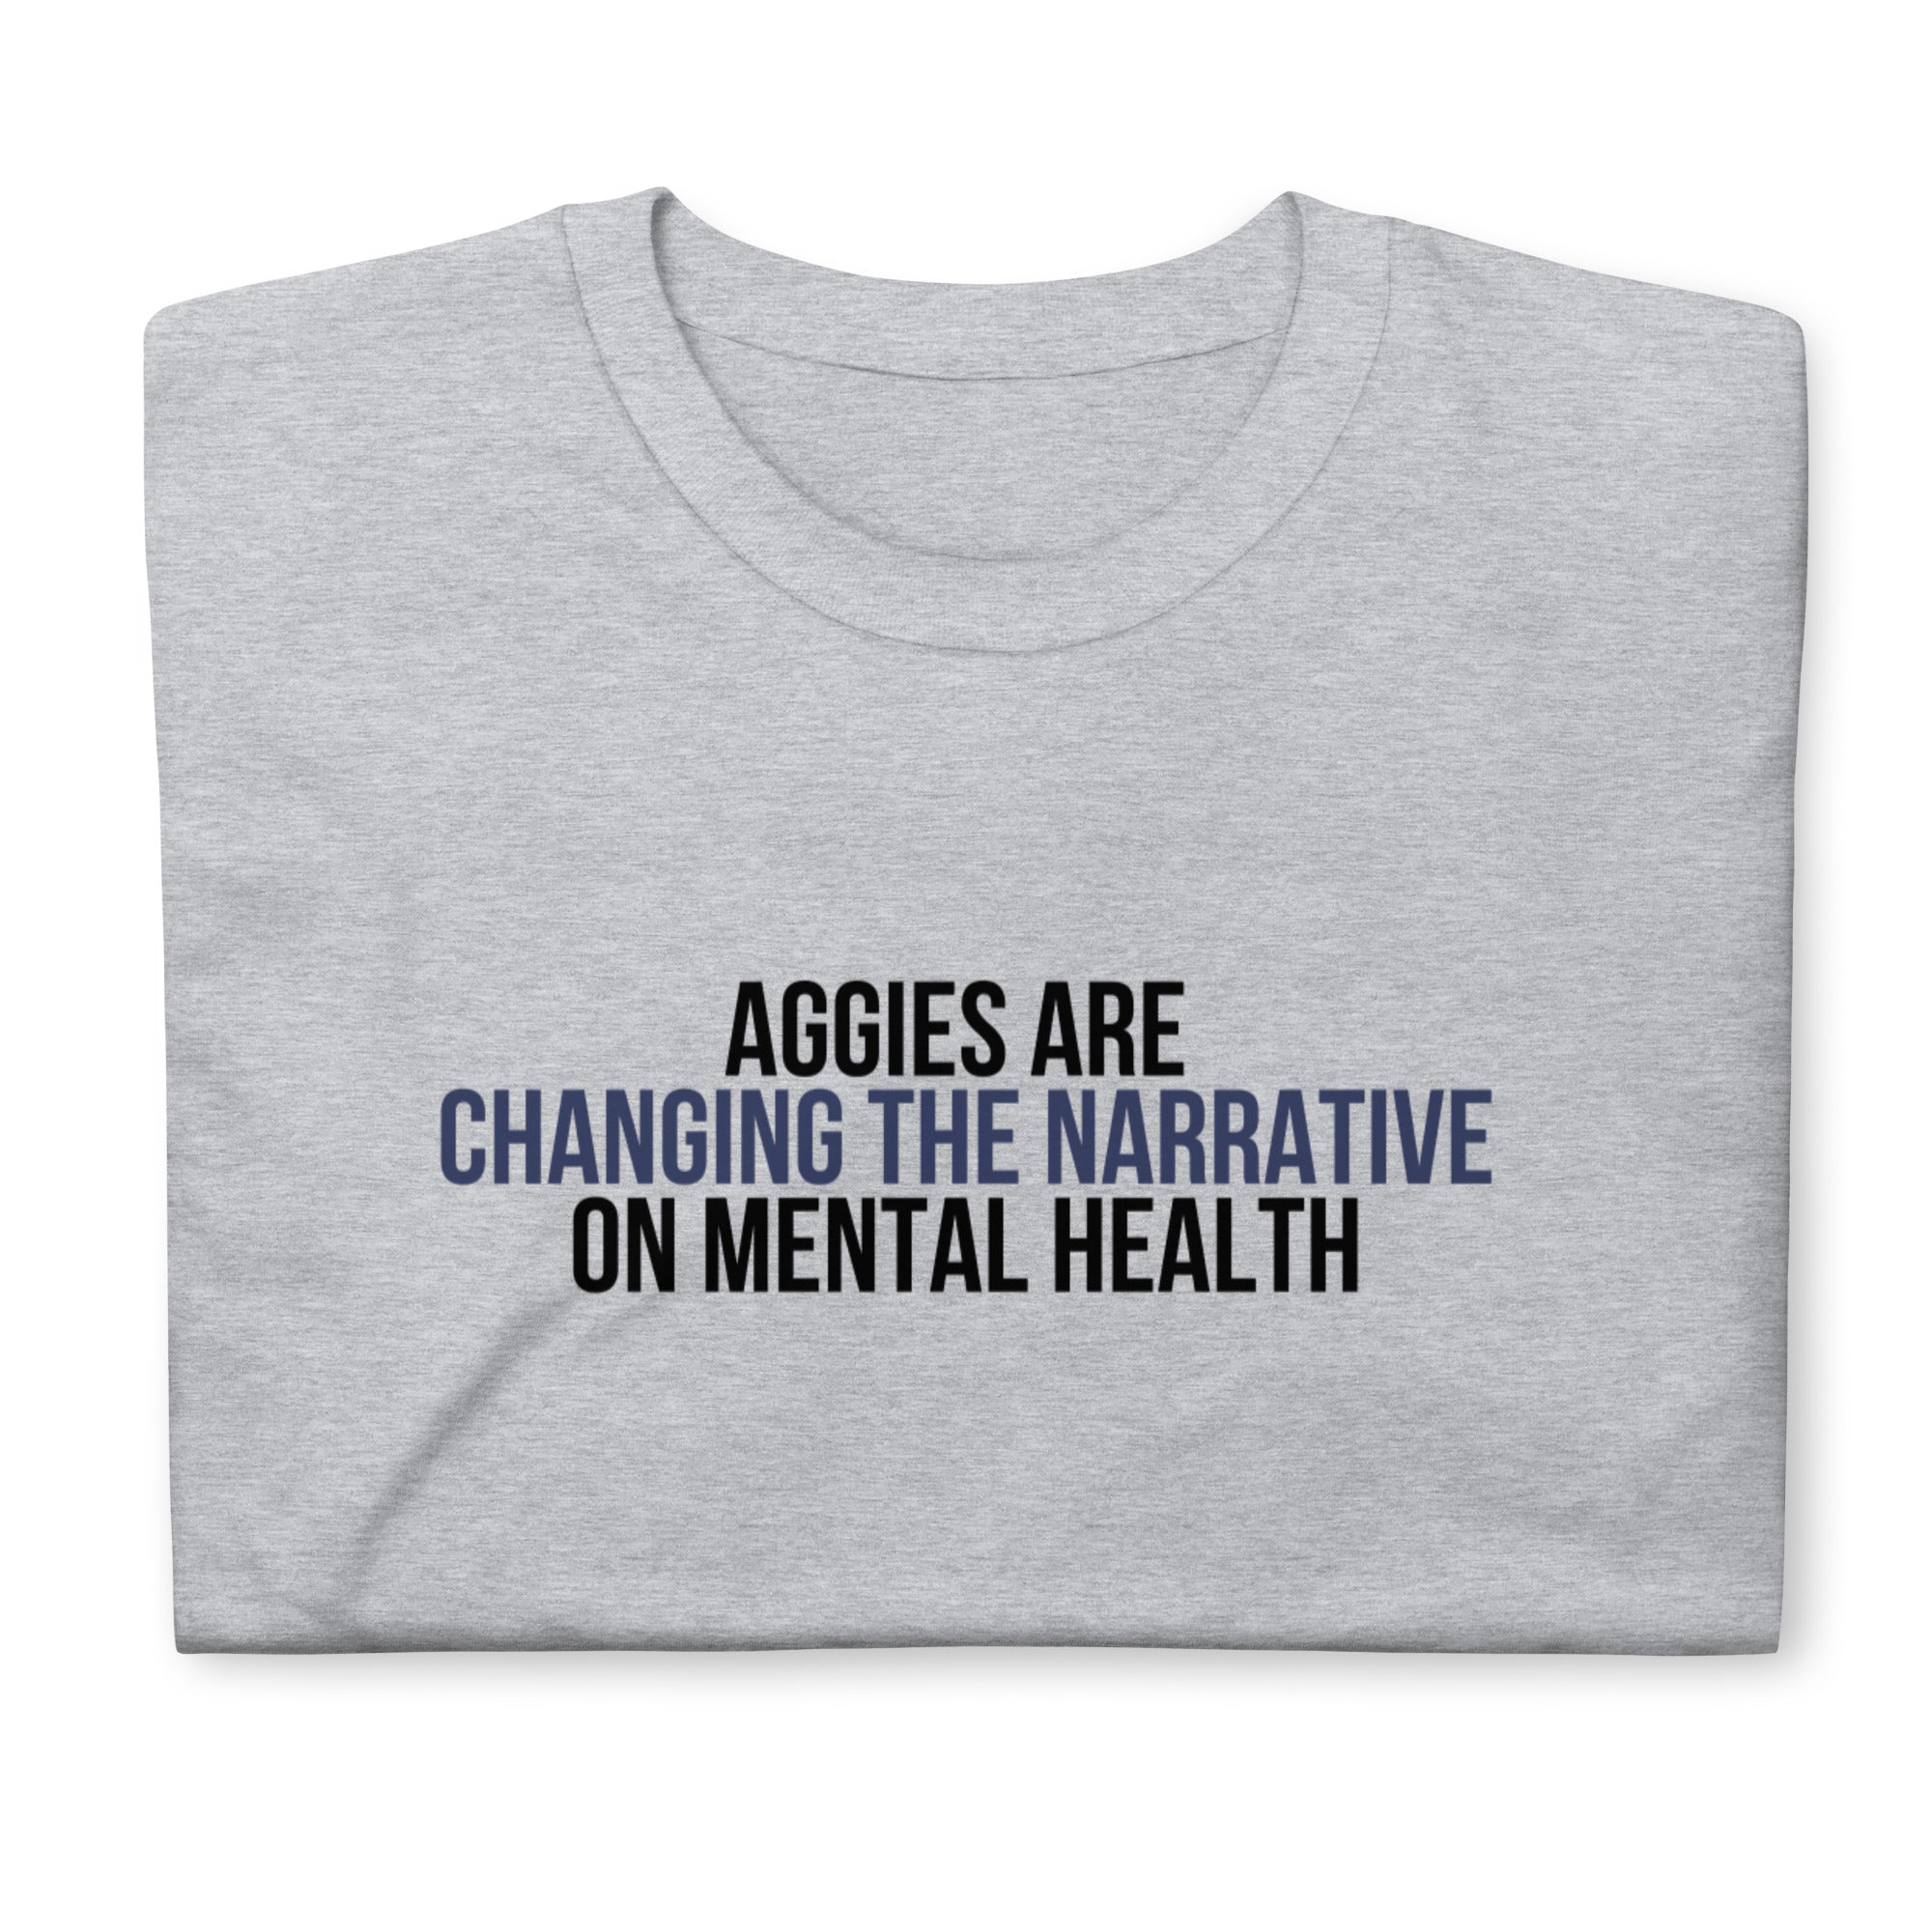 Aggies are changing the narrative on mental health